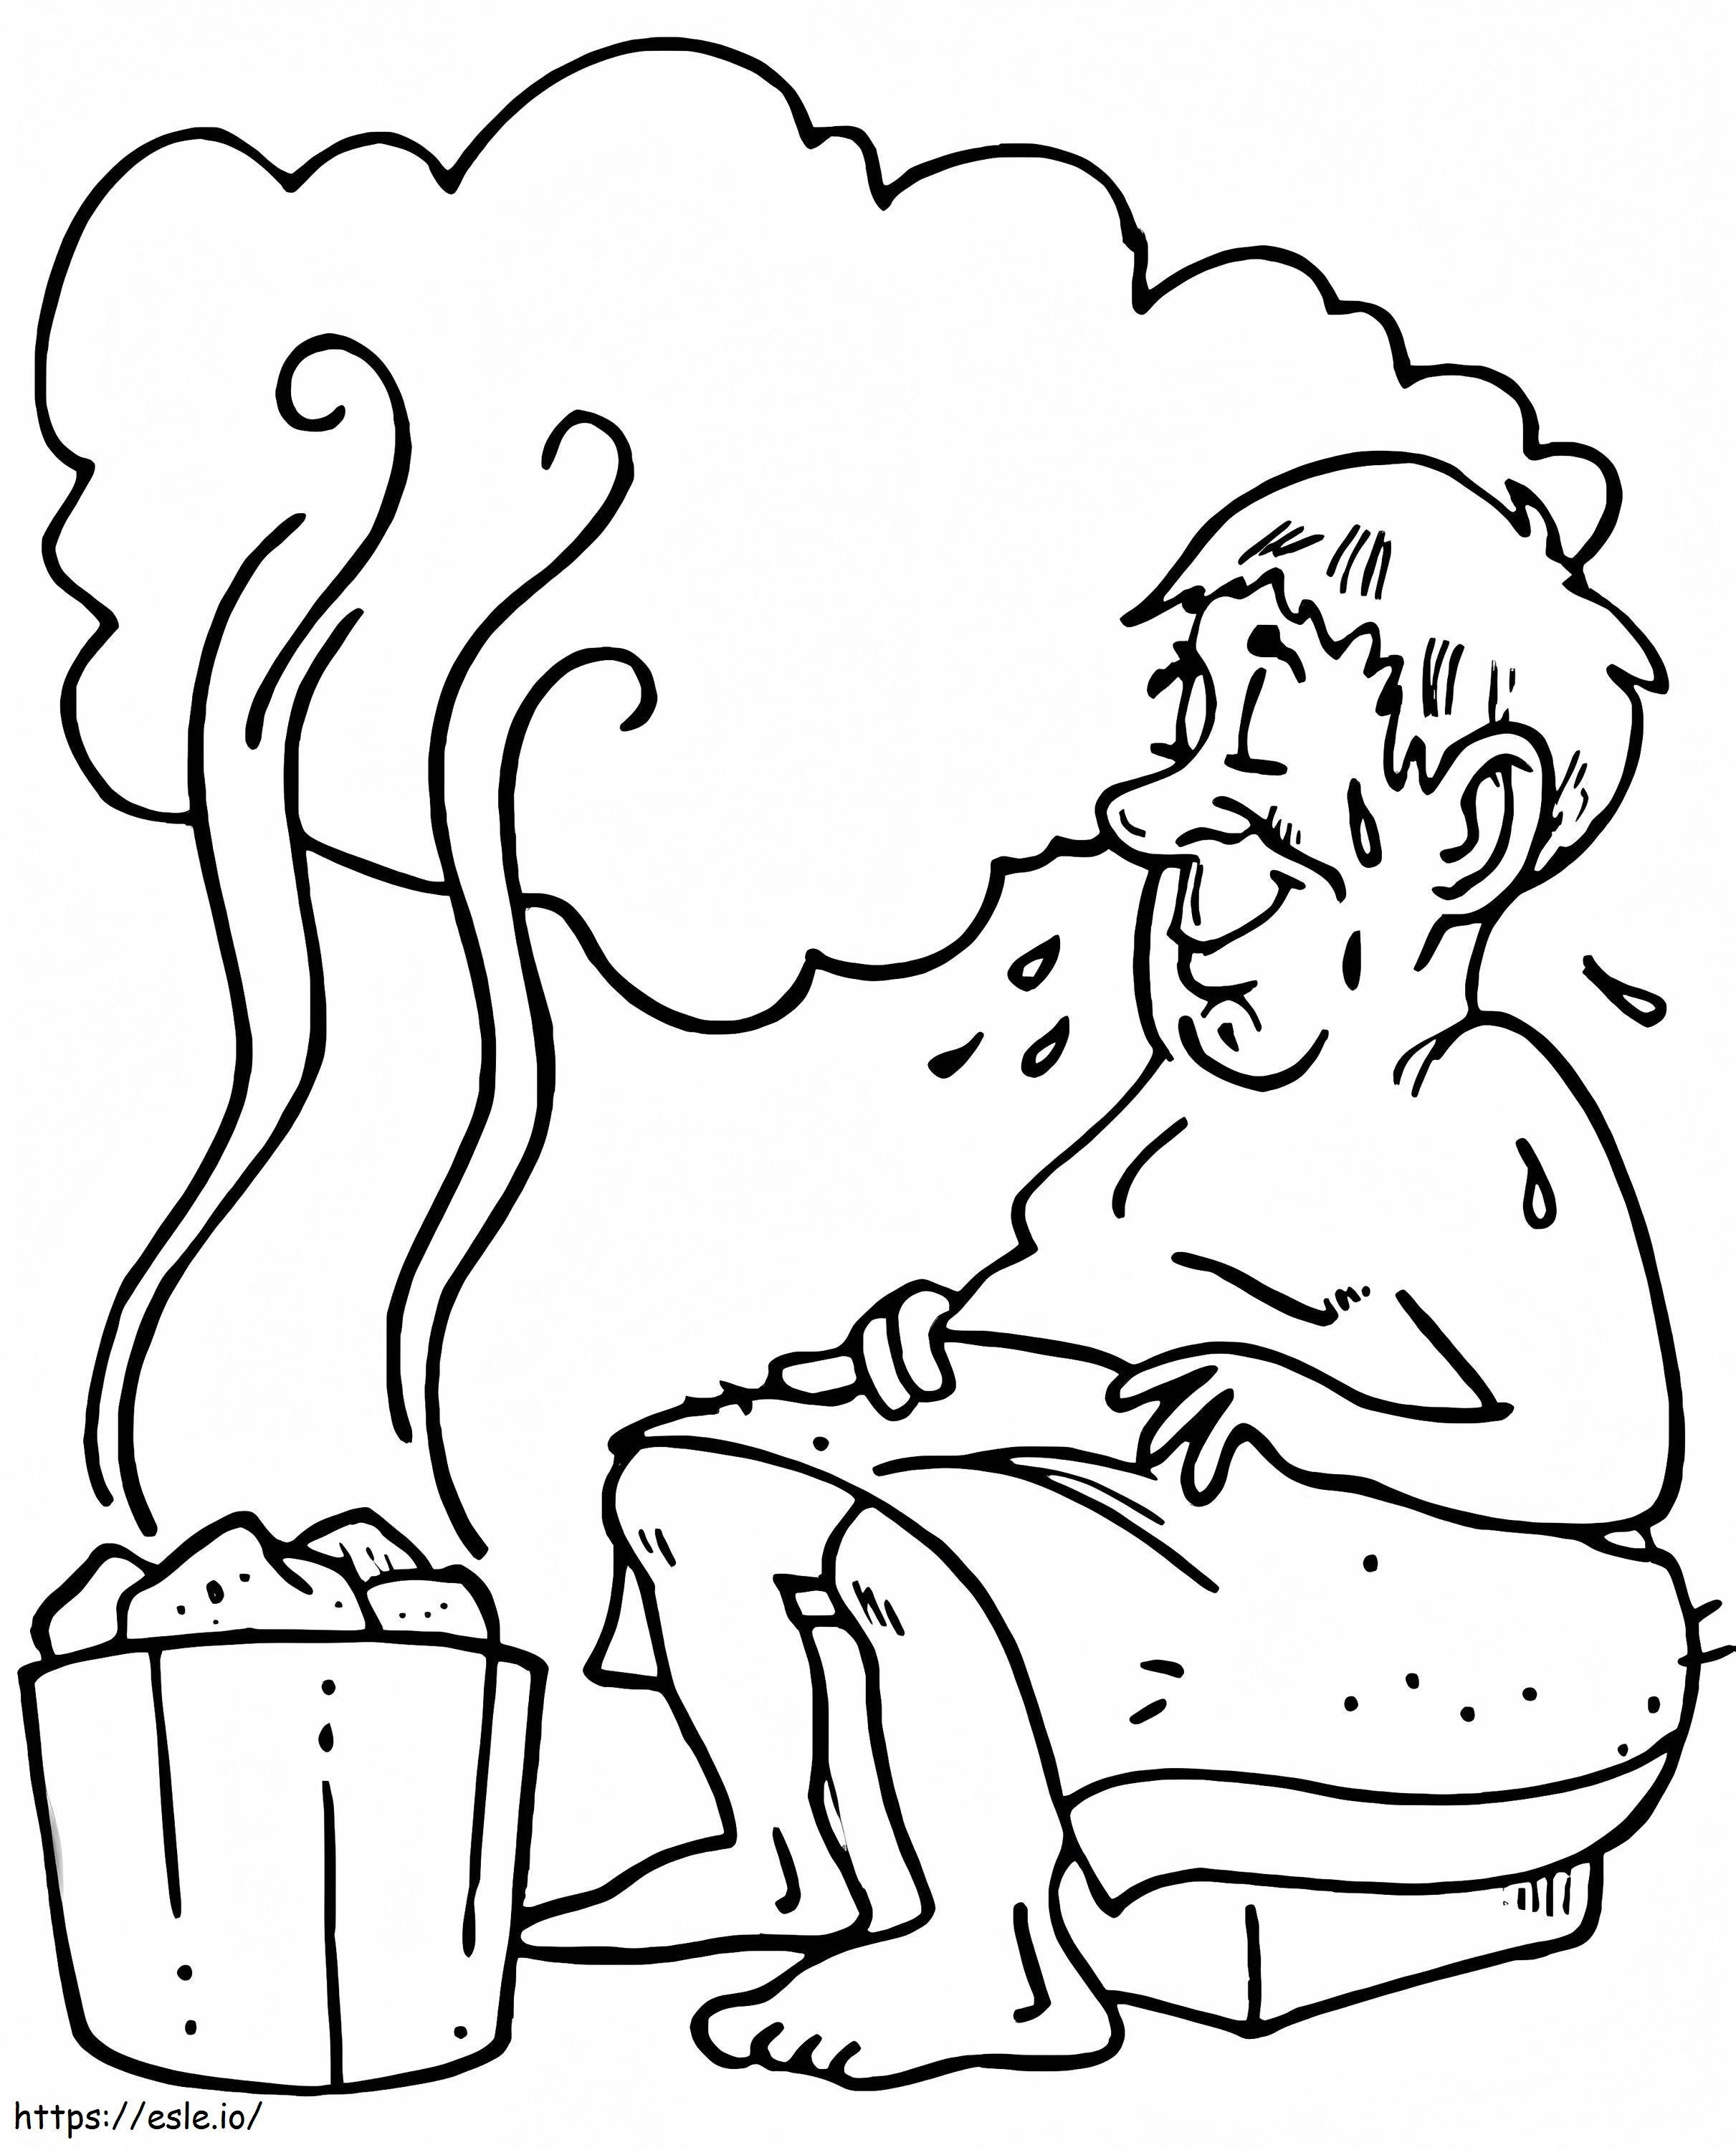 Russian Sauna coloring page